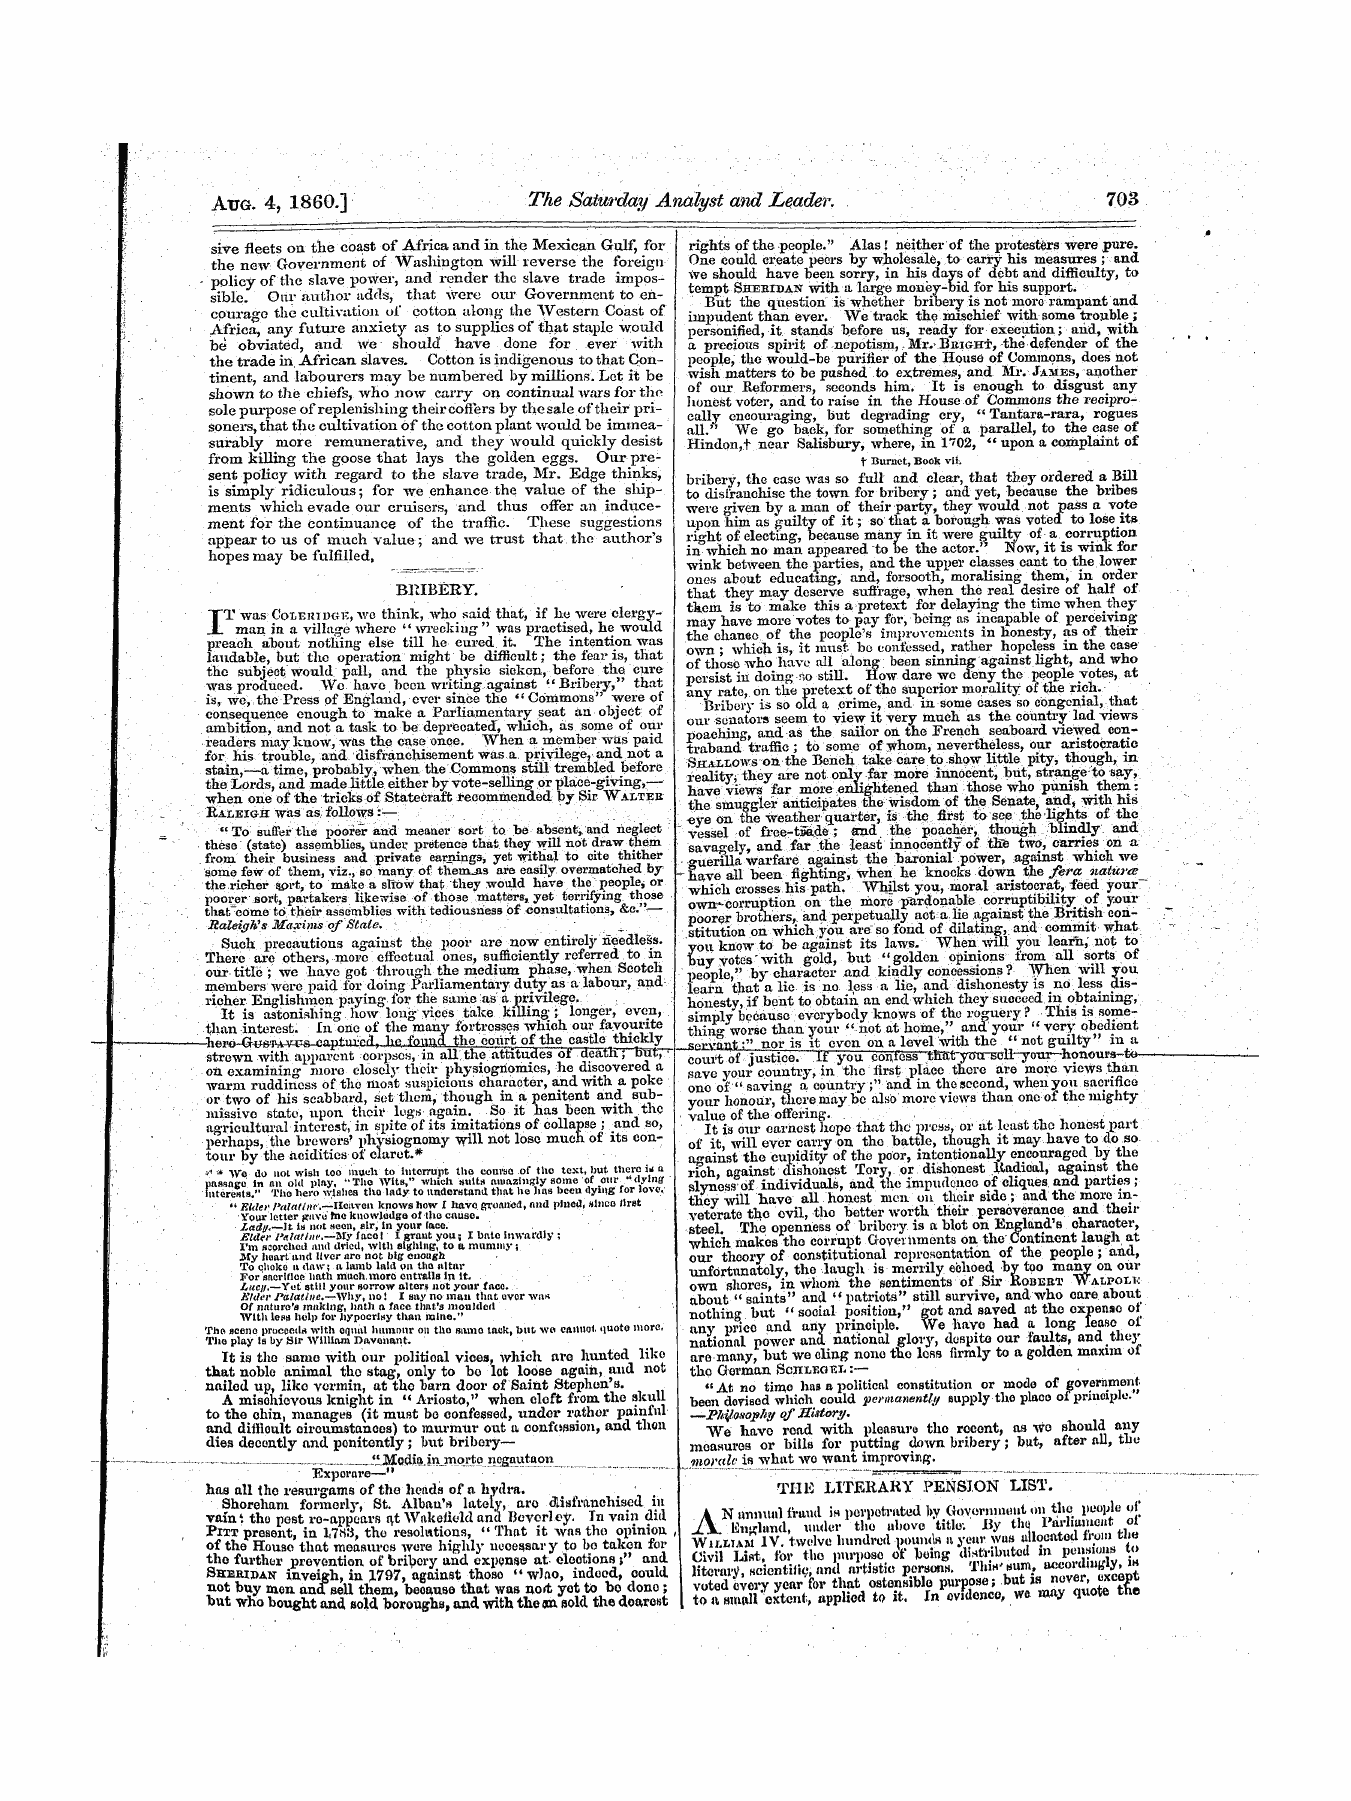 Leader (1850-1860): jS F Y, 1st edition - The Literary Pension List.